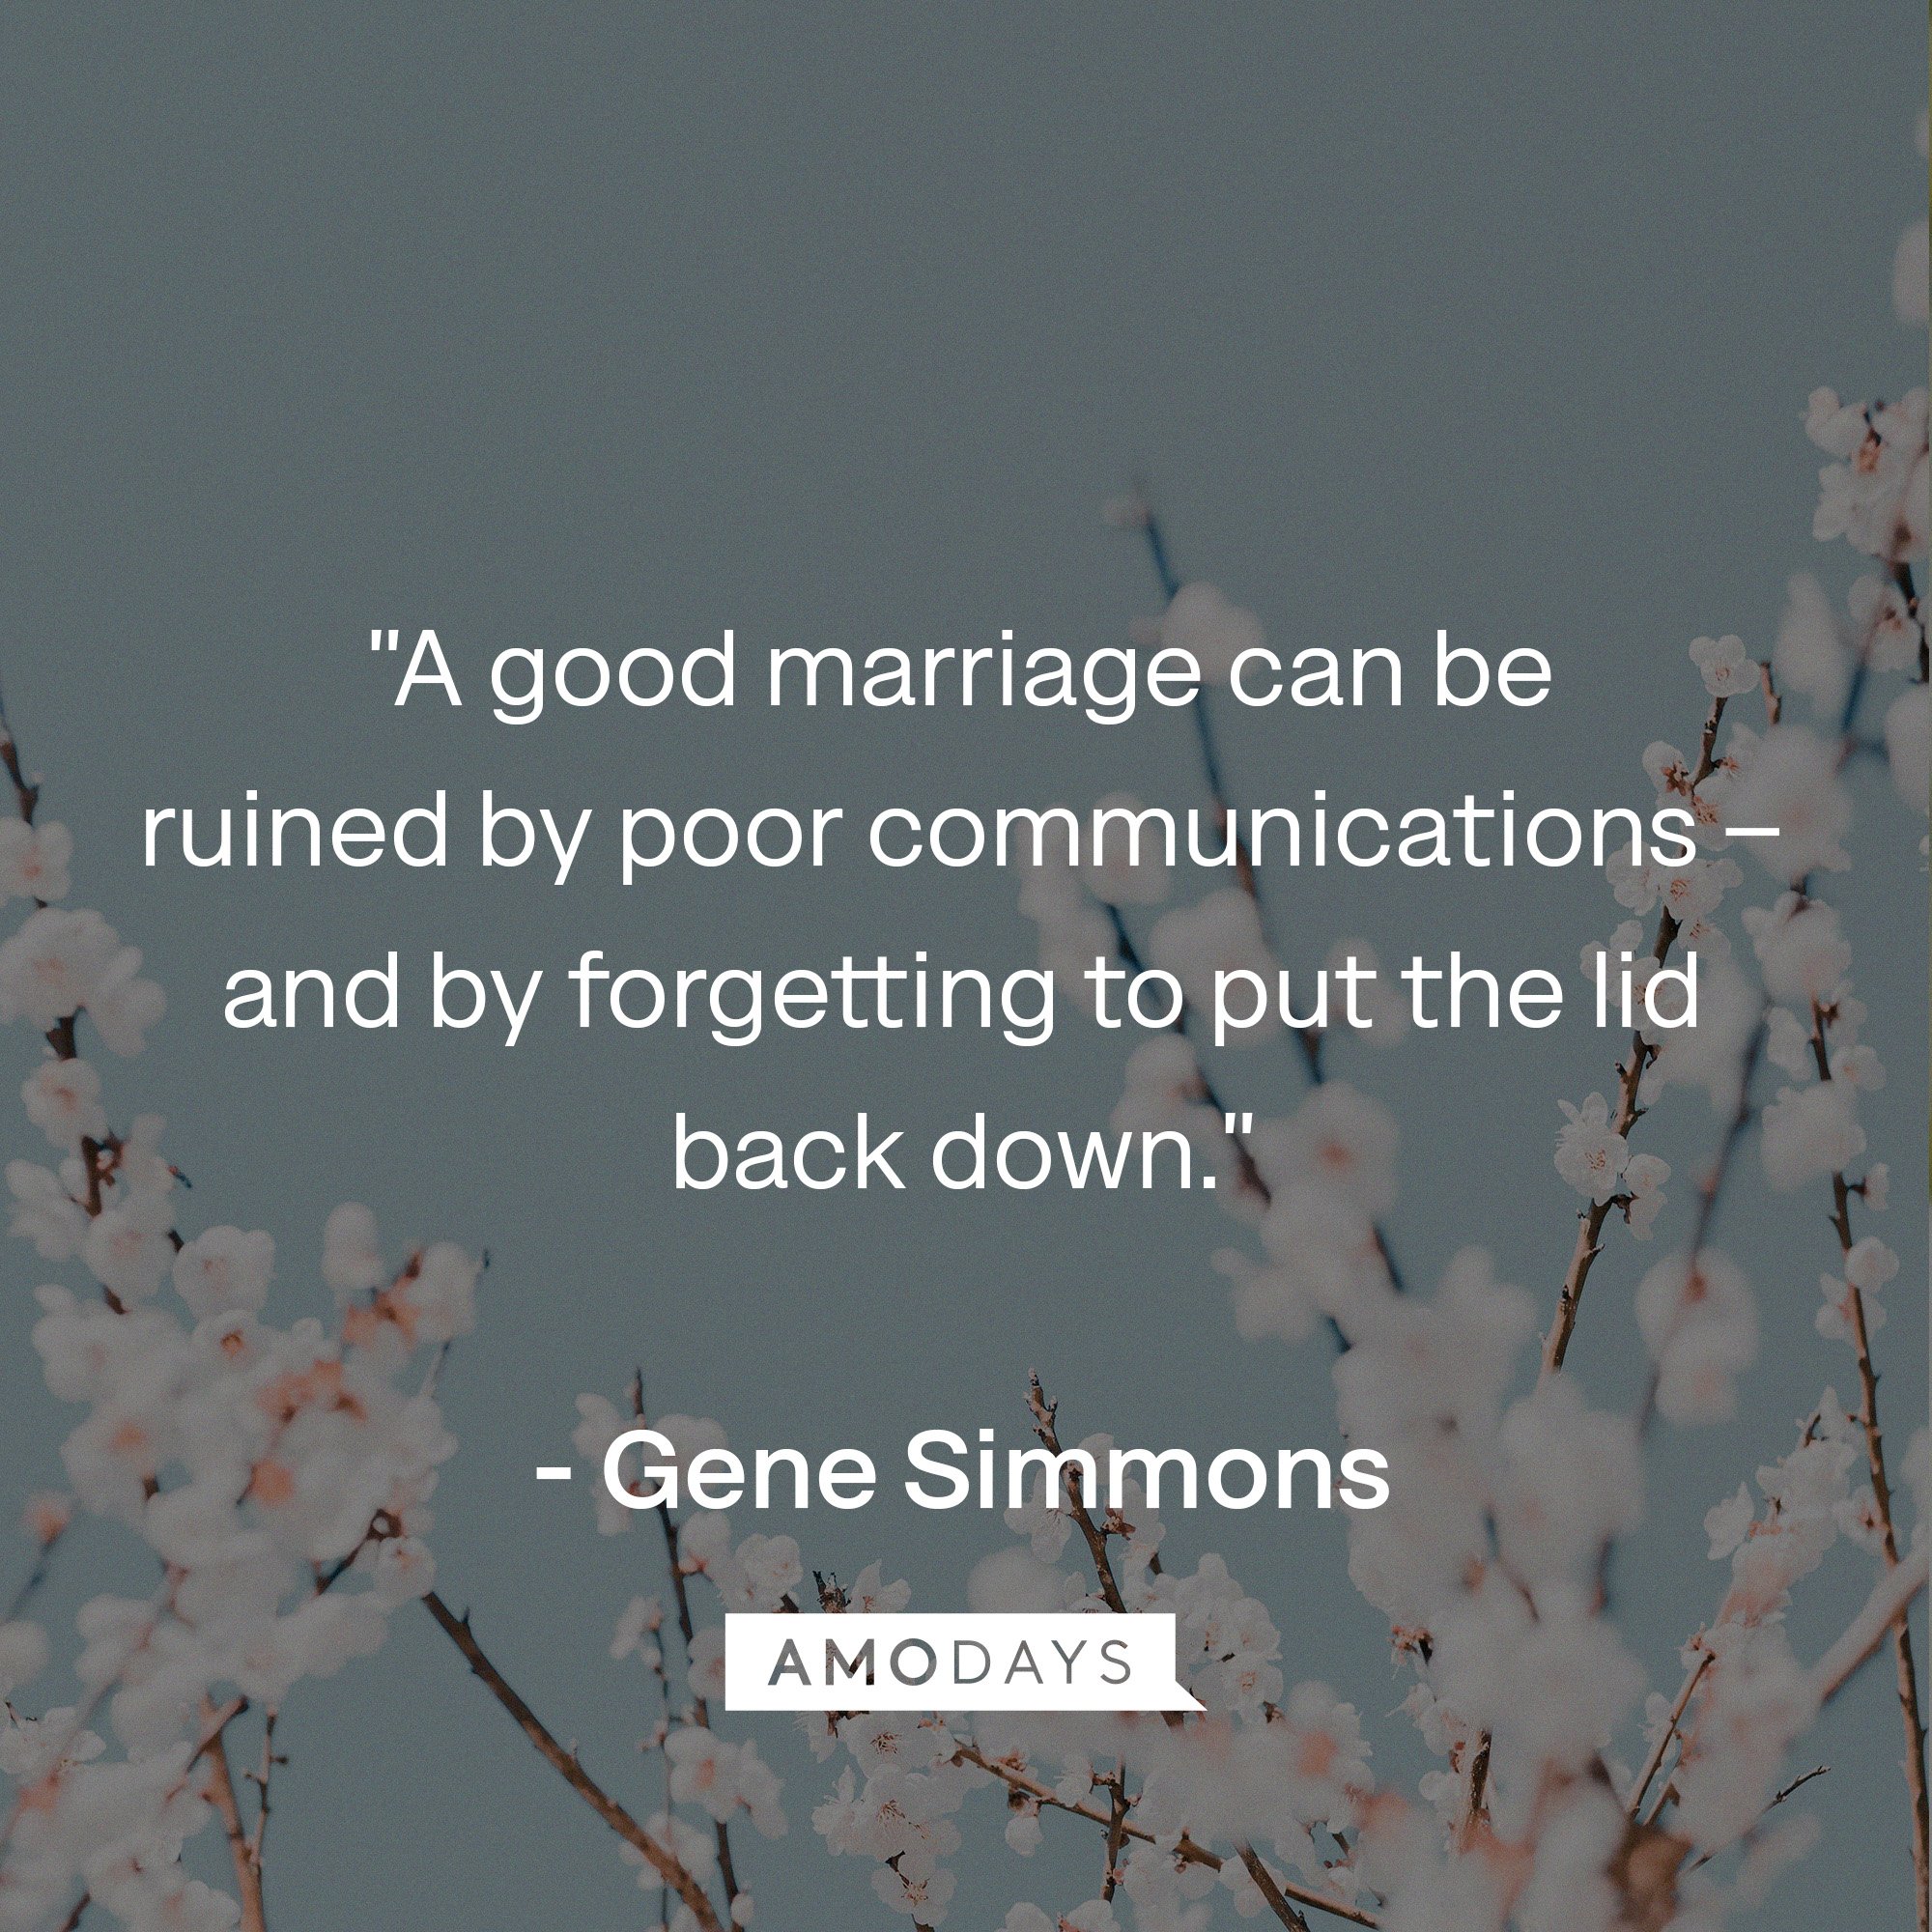 Gene Simmons' quotes: "A good marriage can be ruined by poor communications – and by forgetting to put the lid back down."   | Image: AmoDays